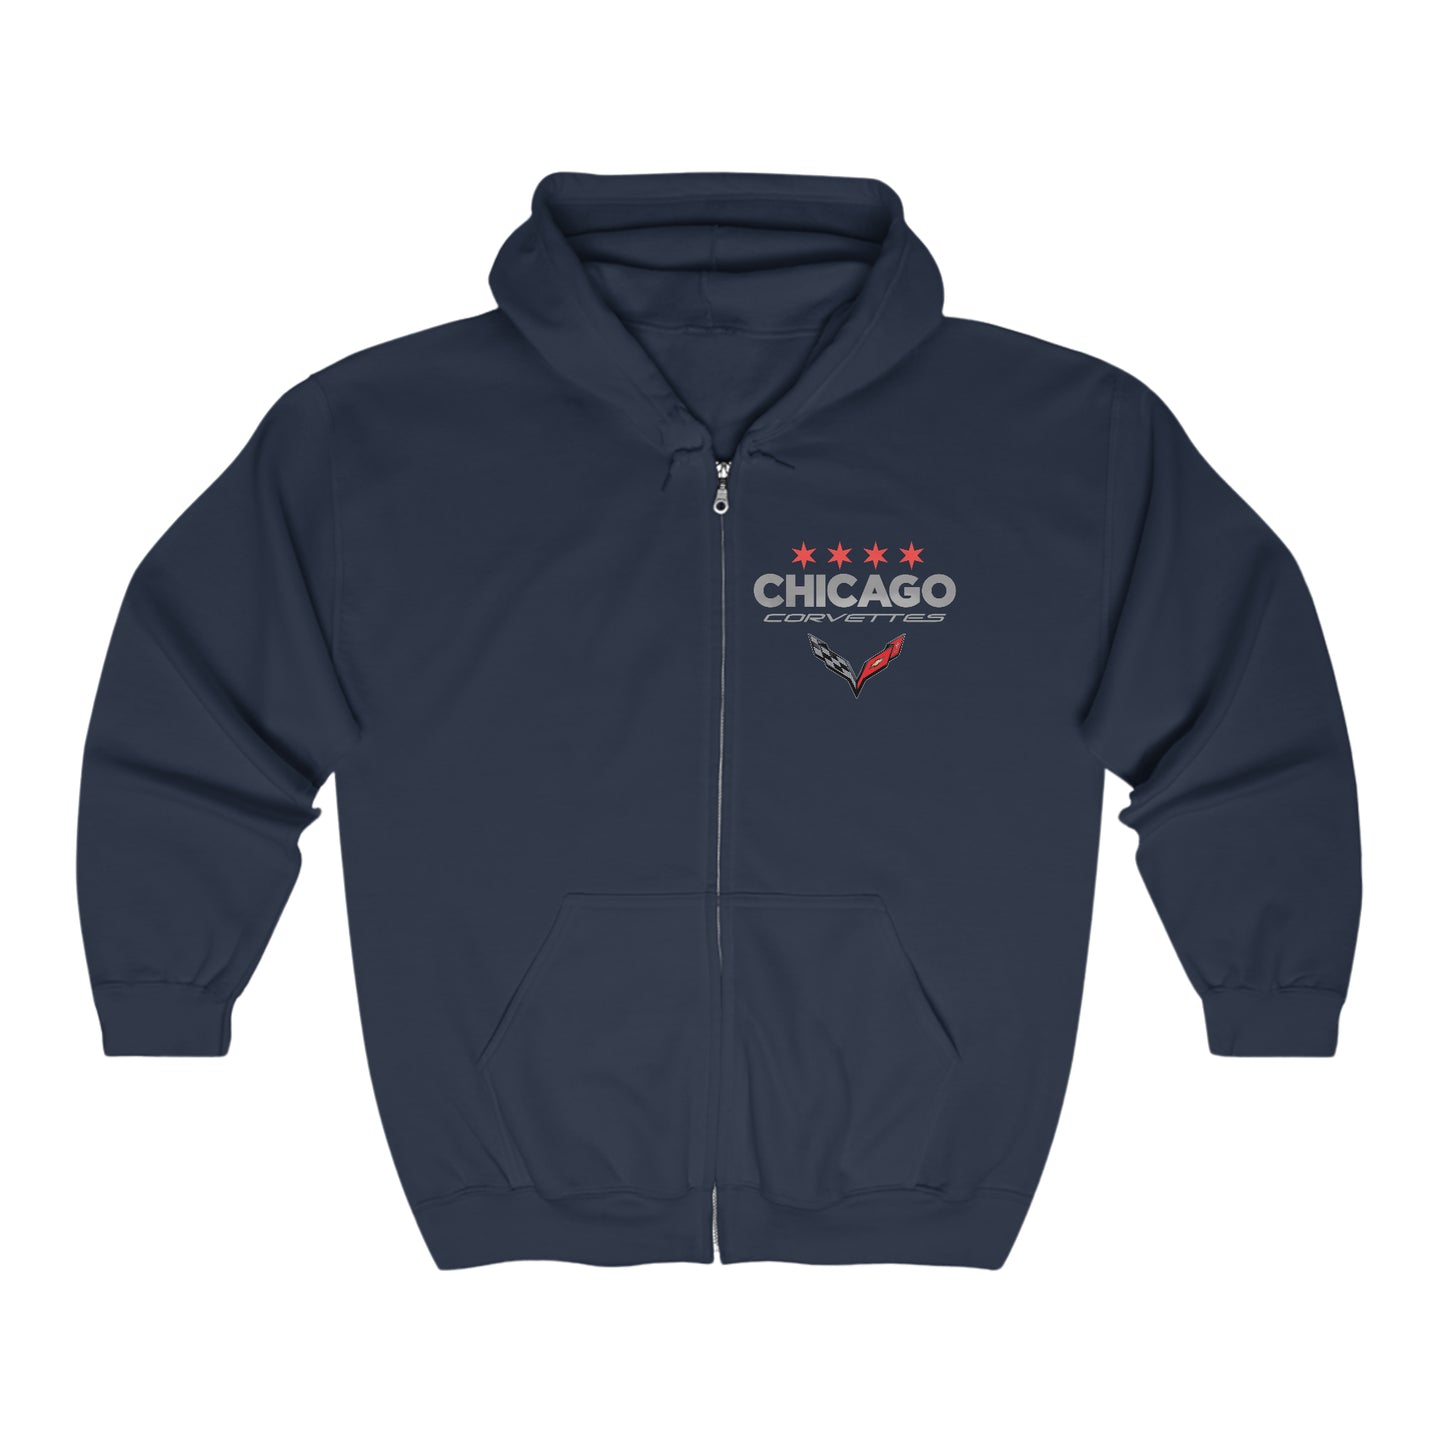 Chicago Corvettes - Graphic Zip Hoodie - Time-Traveling C7 ZR1 at the Drive-In